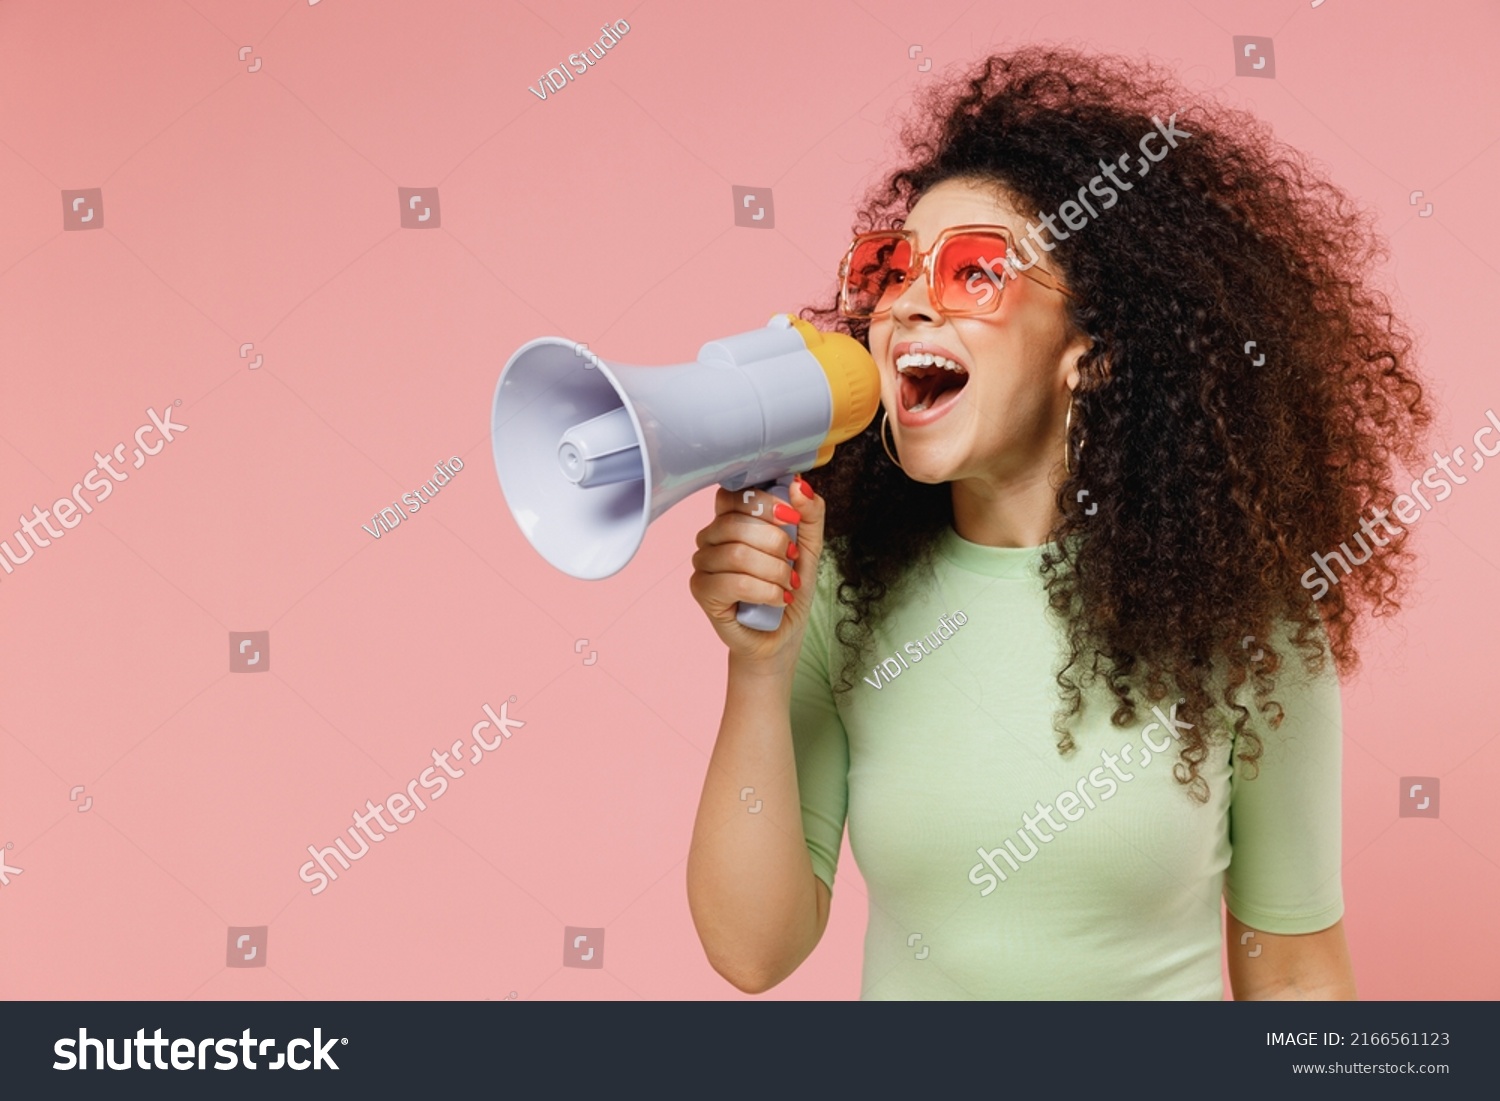 Exultant happy vivid young curly latin woman 20s wears mint t-shirt sunglasses hold scream in megaphone announces discounts sale Hurry up isolated on plain pastel light pink background studio portrait #2166561123